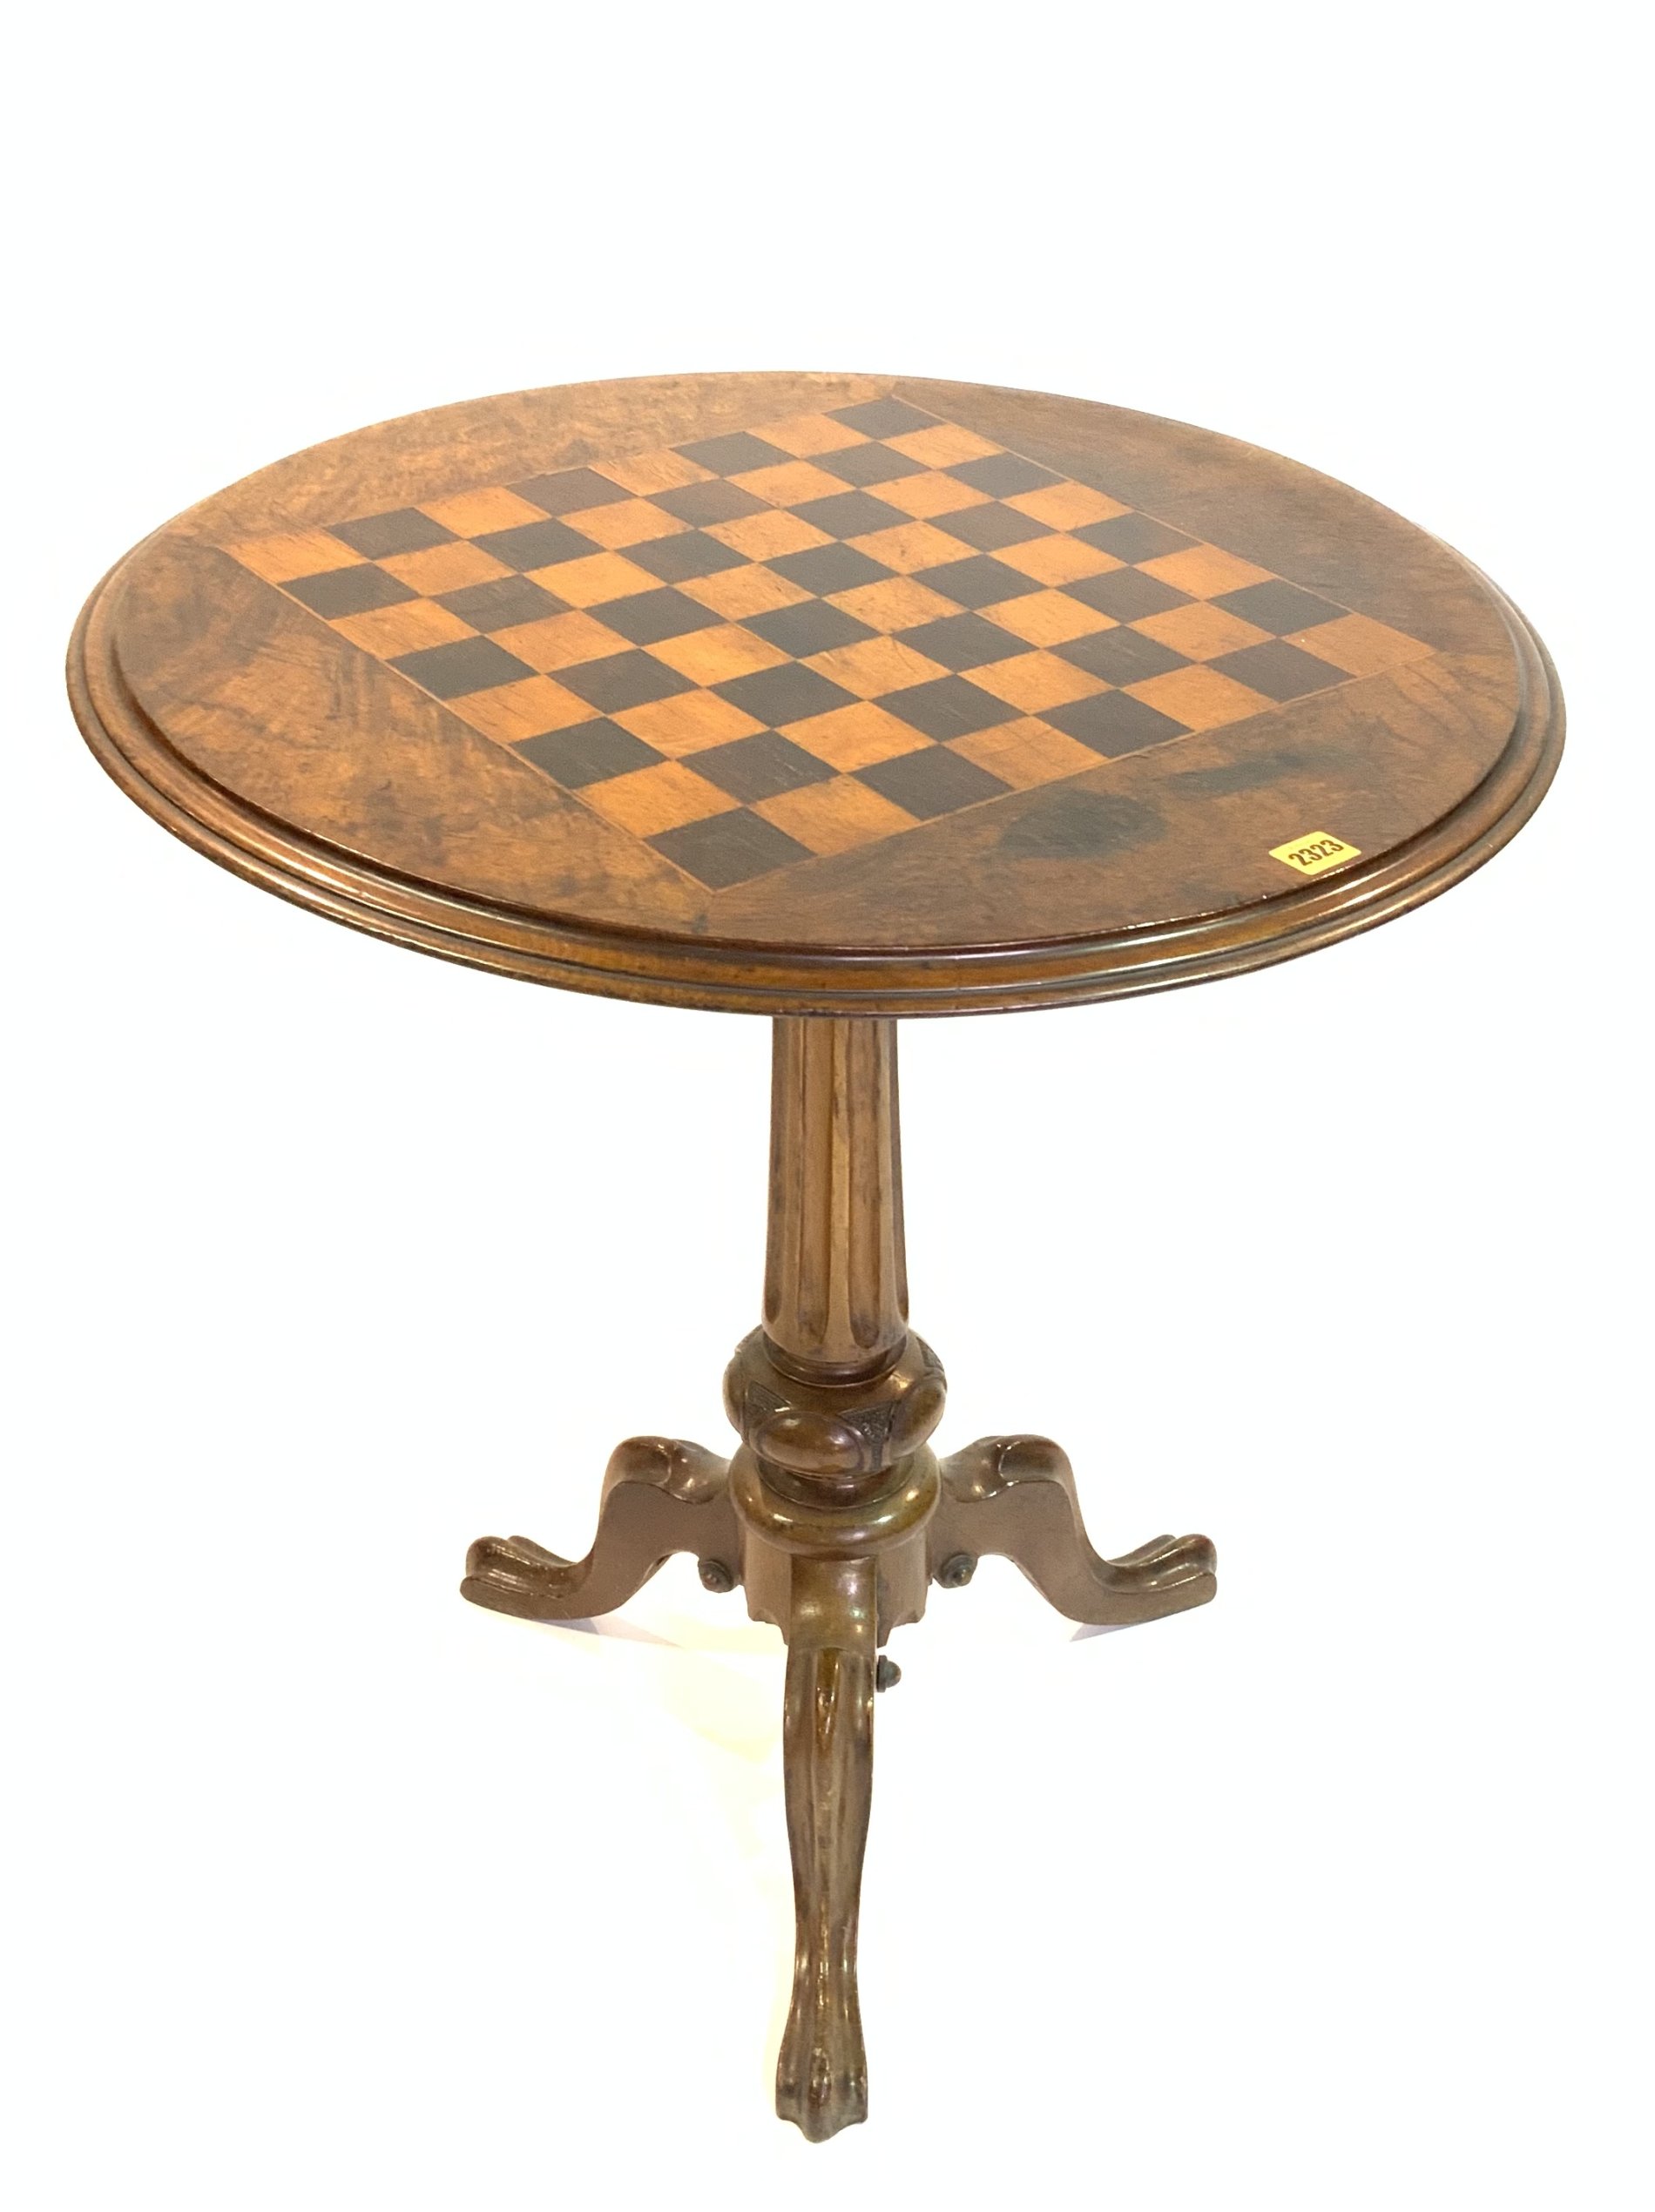 A VICTORIAN WALNUT TRIPOD OCCASIONAL TABLE WITH INSET CHESSBOARD TOP